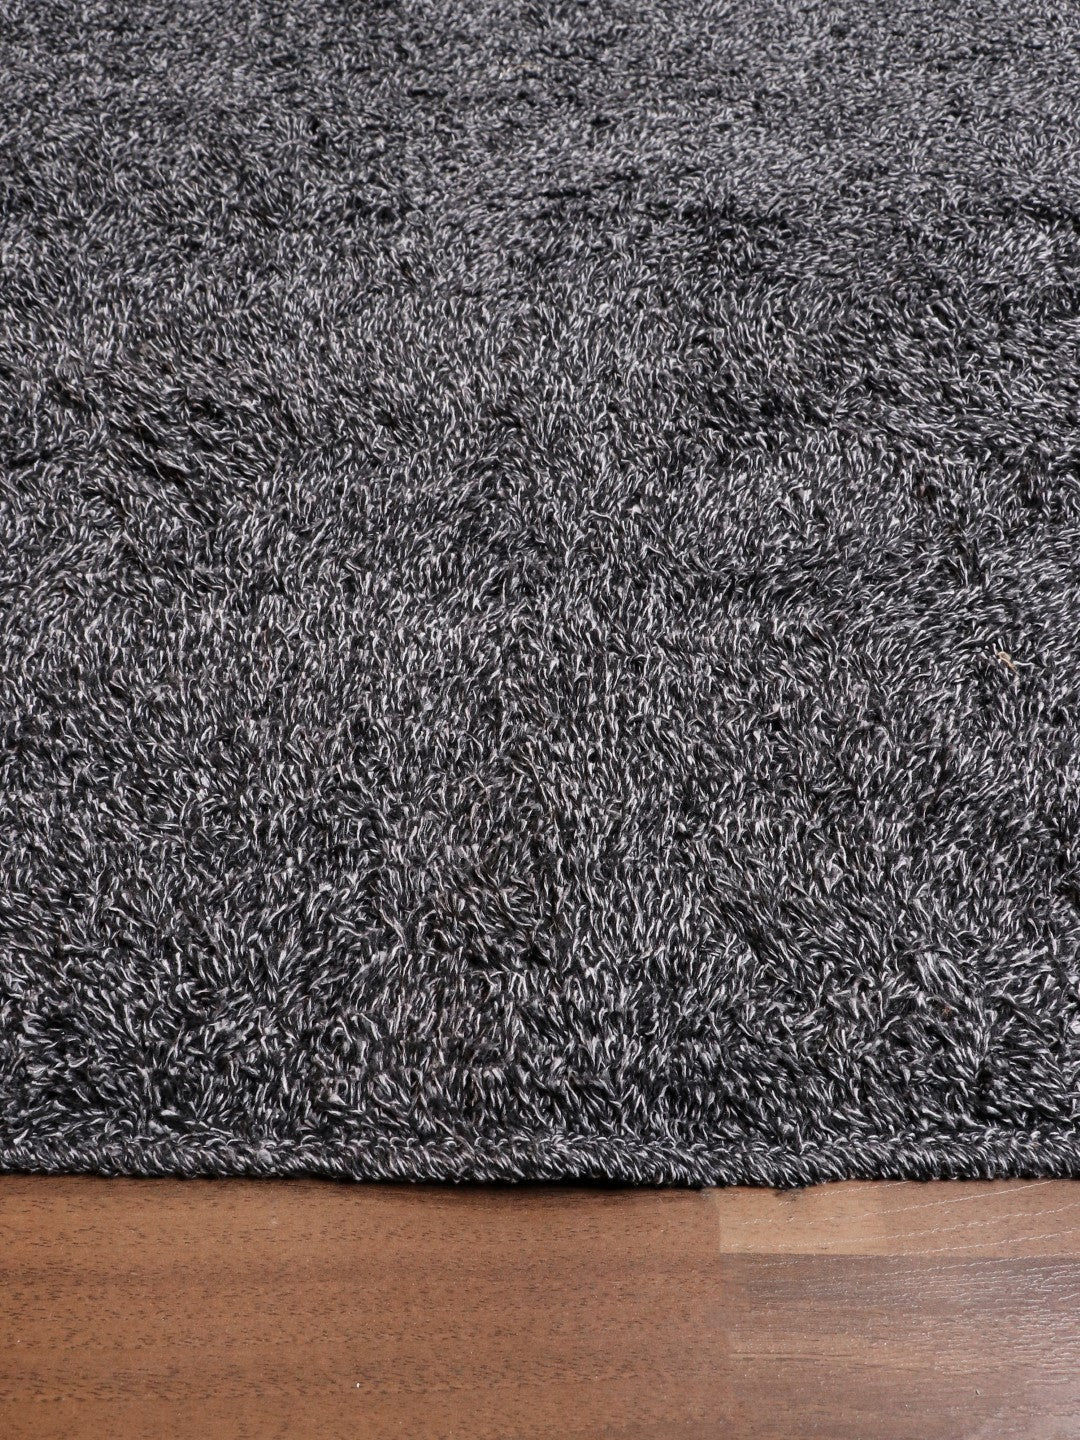 Black Fancy Cotton Shaggy Rectangle Soft and Thick Rug with TPR Backing